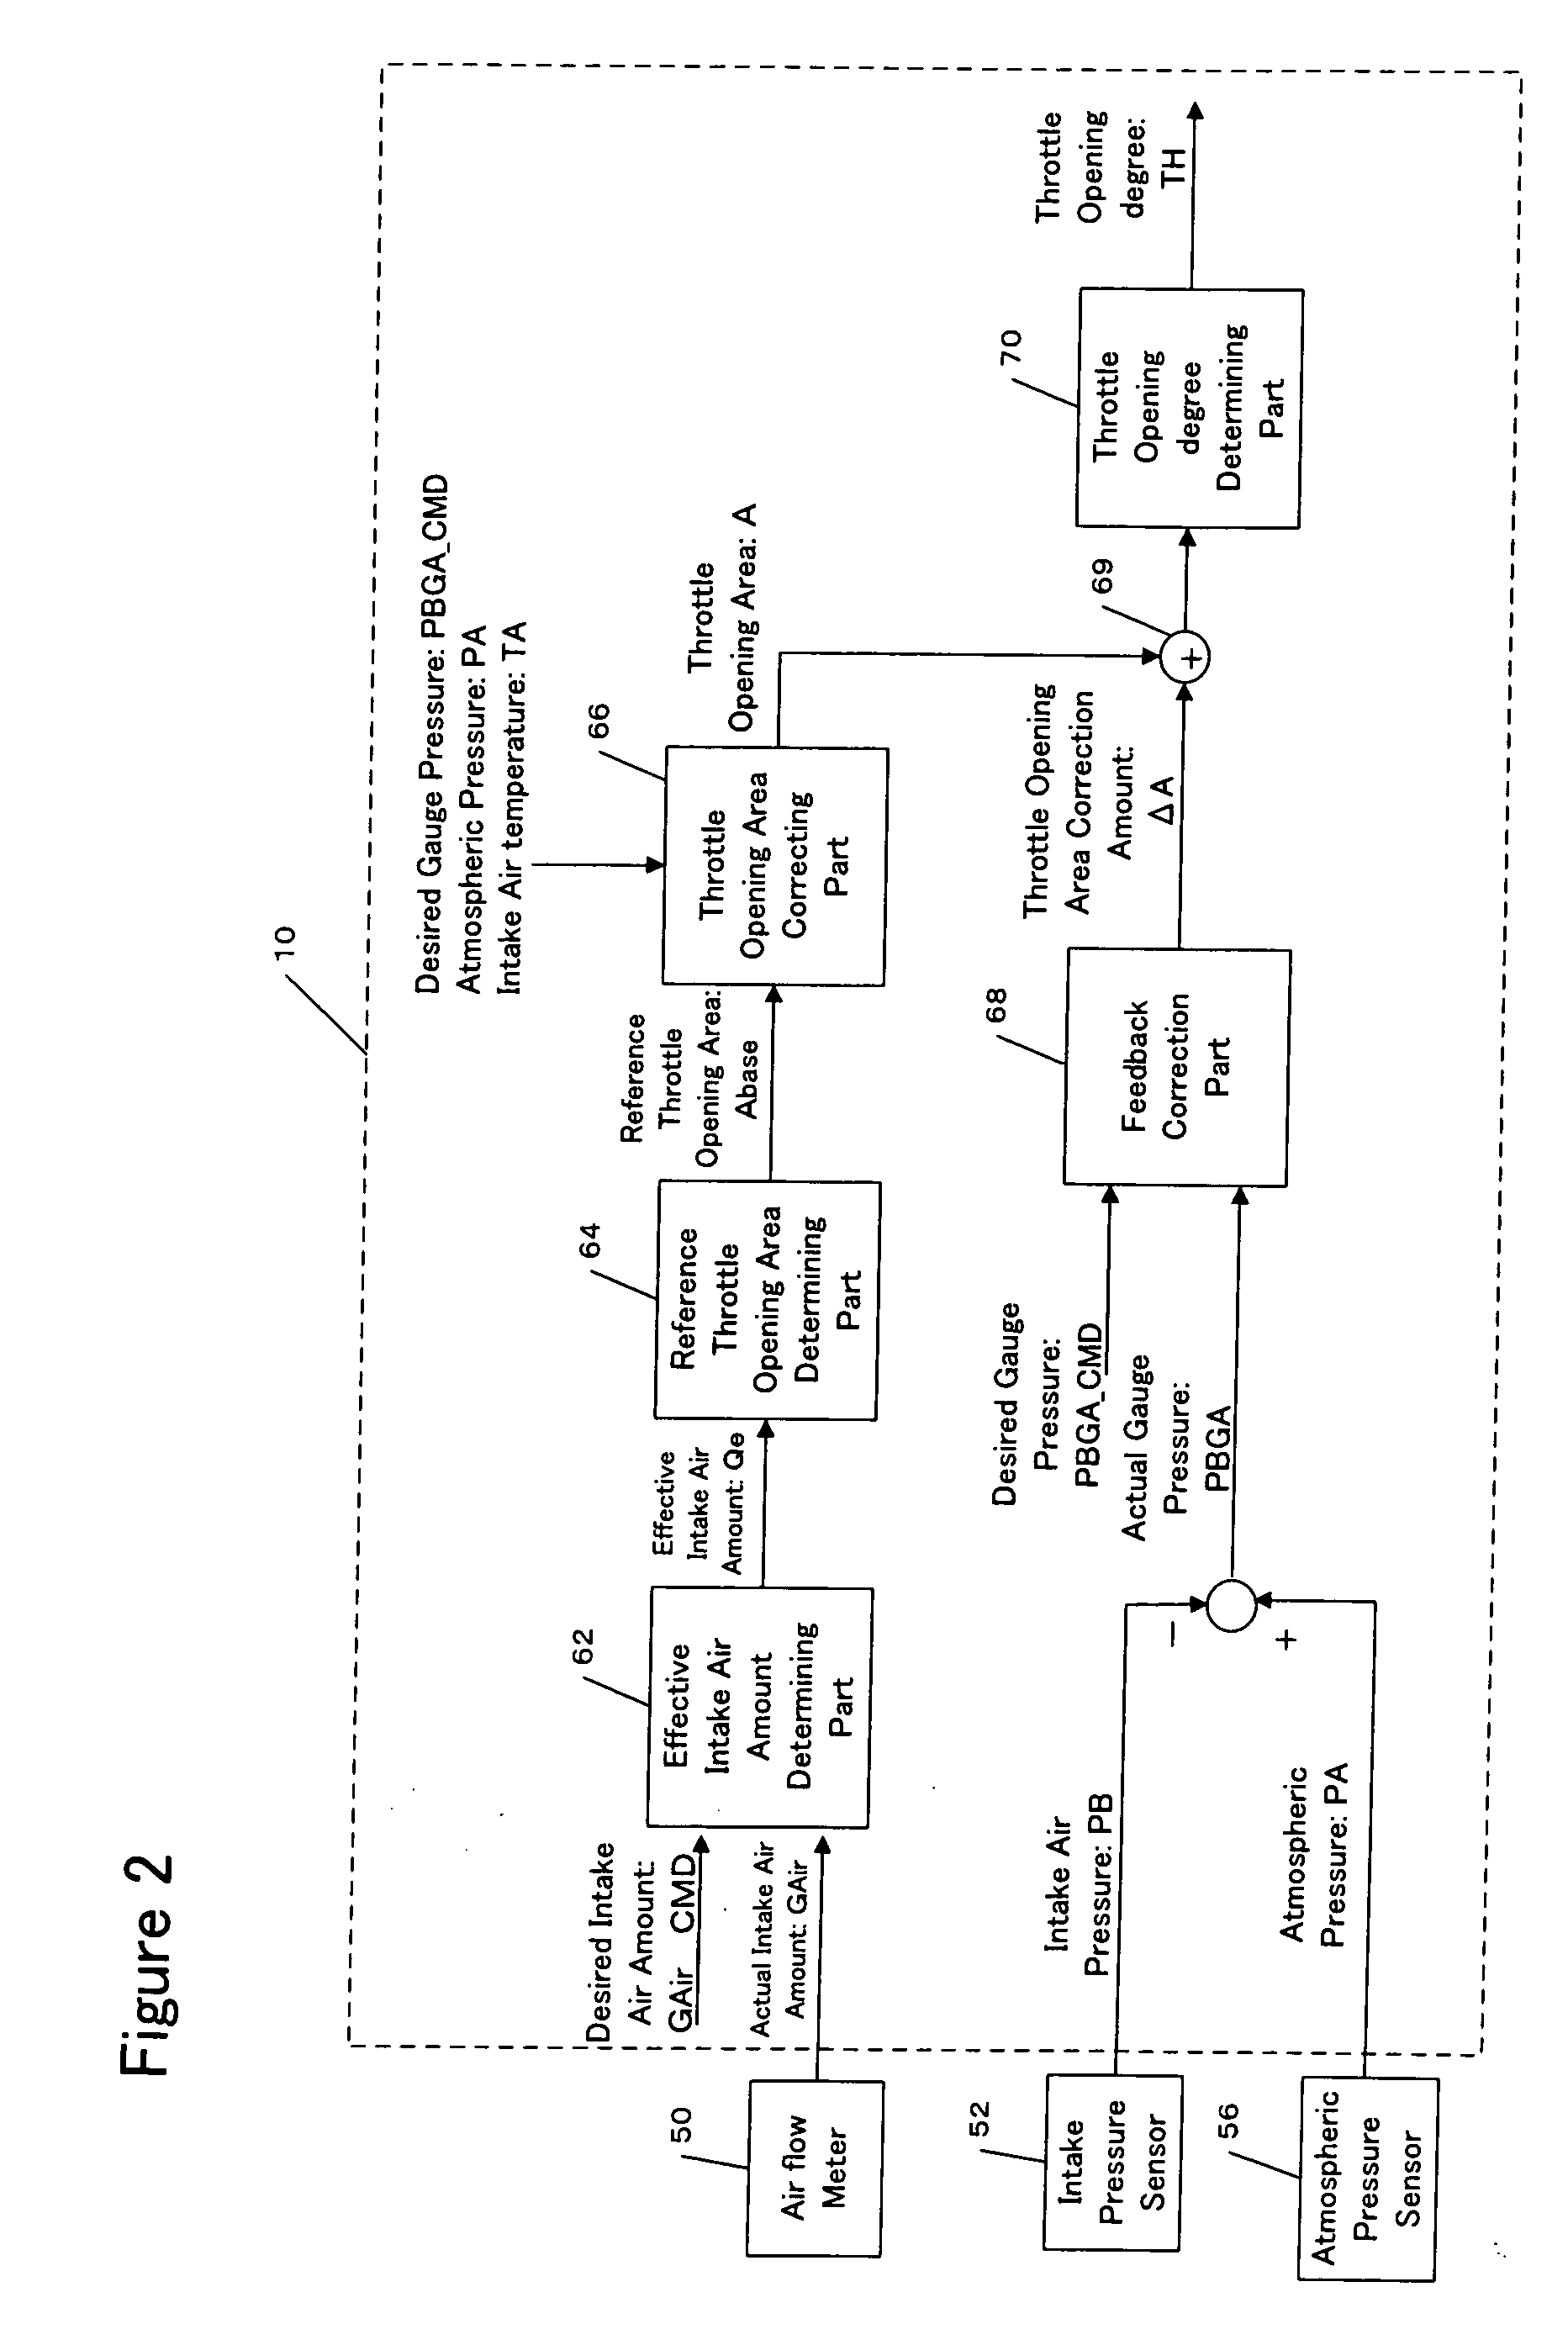 Intake air control of an internal combustion engine